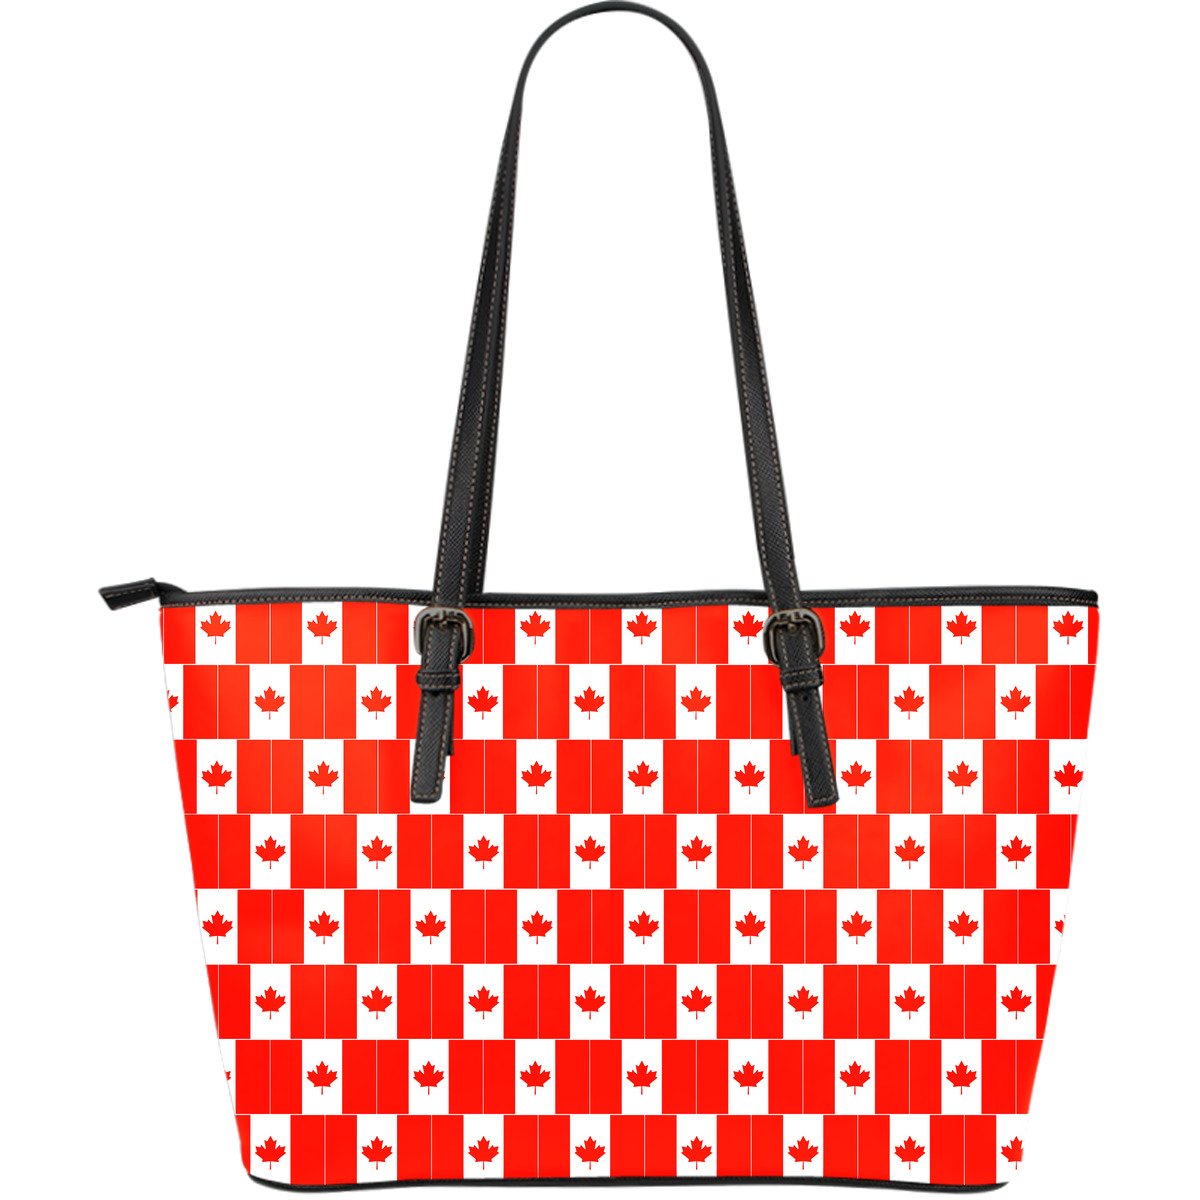 canada-leather-tote-bag-flag-pattern